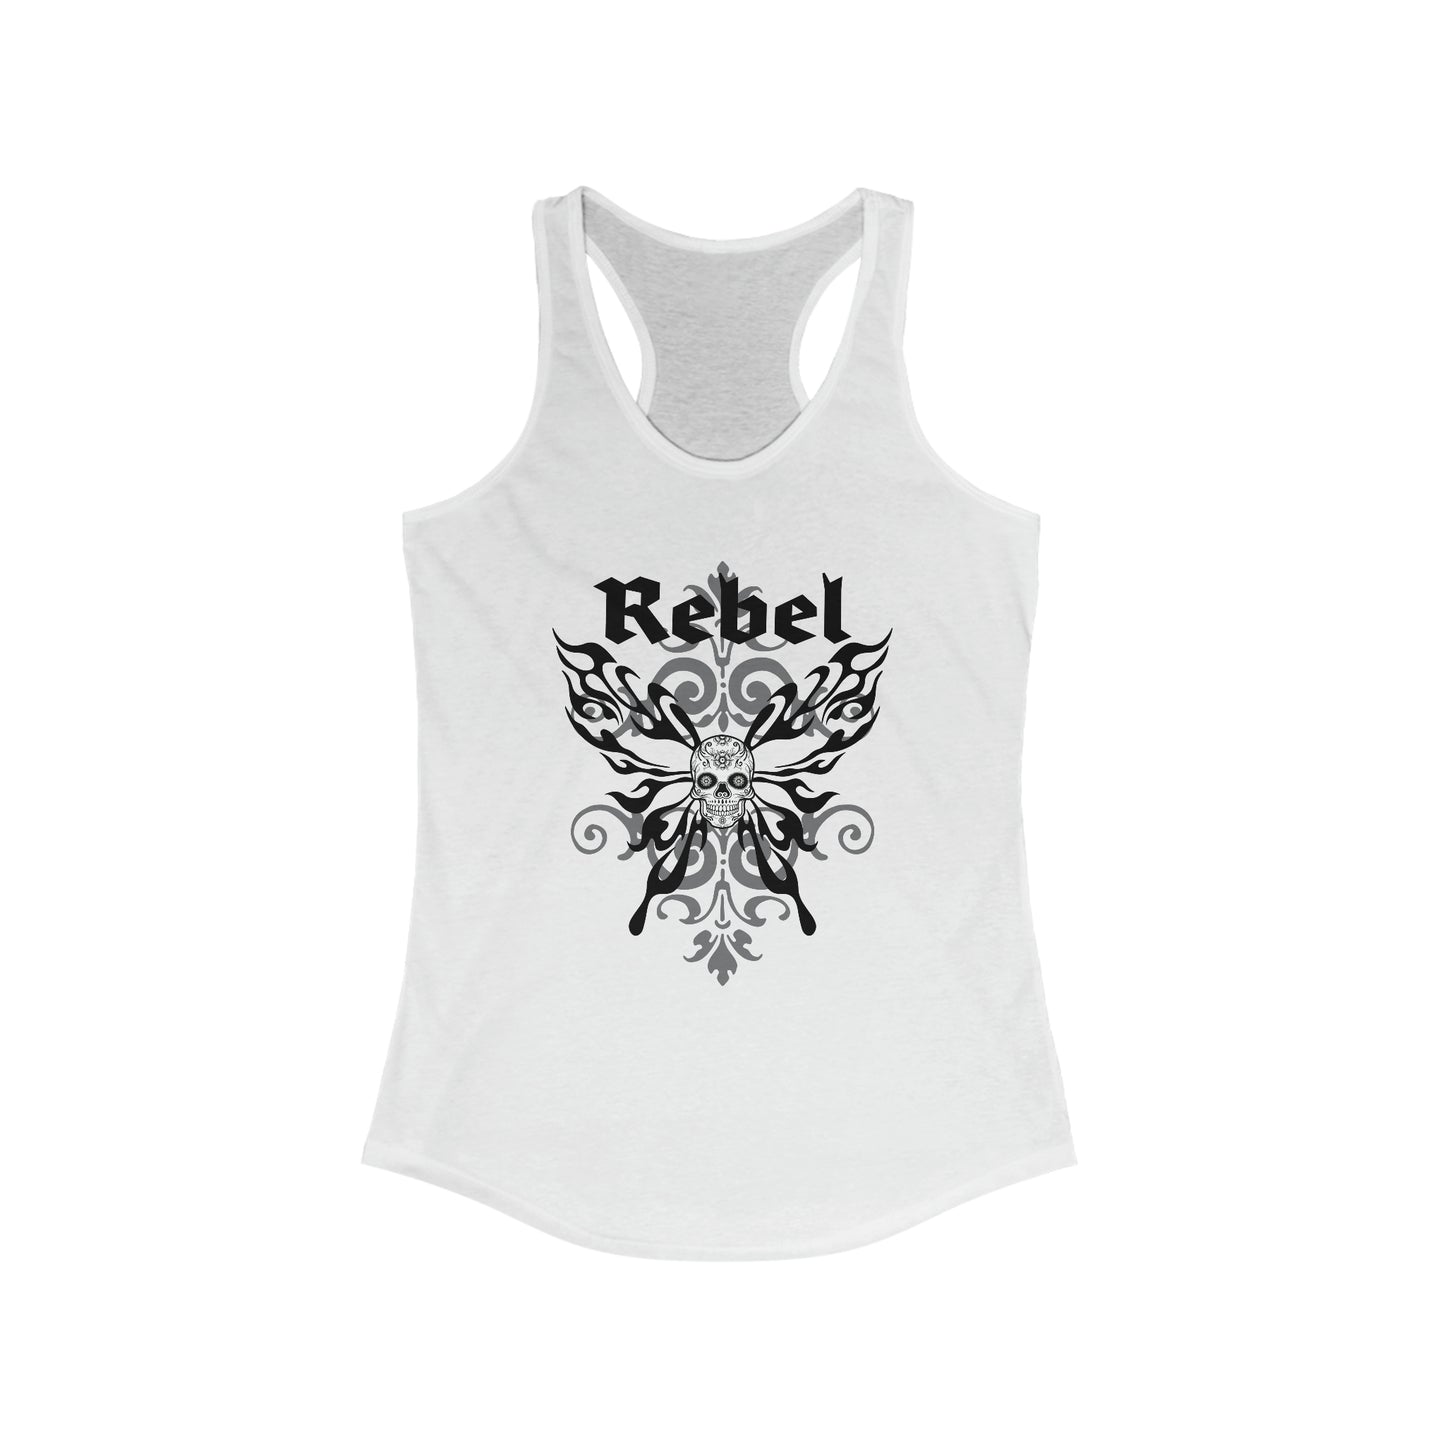 Rebel Tank Top For Day Of The Dead Top For Butterfly Tank For Sugar Skull Racer Back Tank For Conservative Ladies